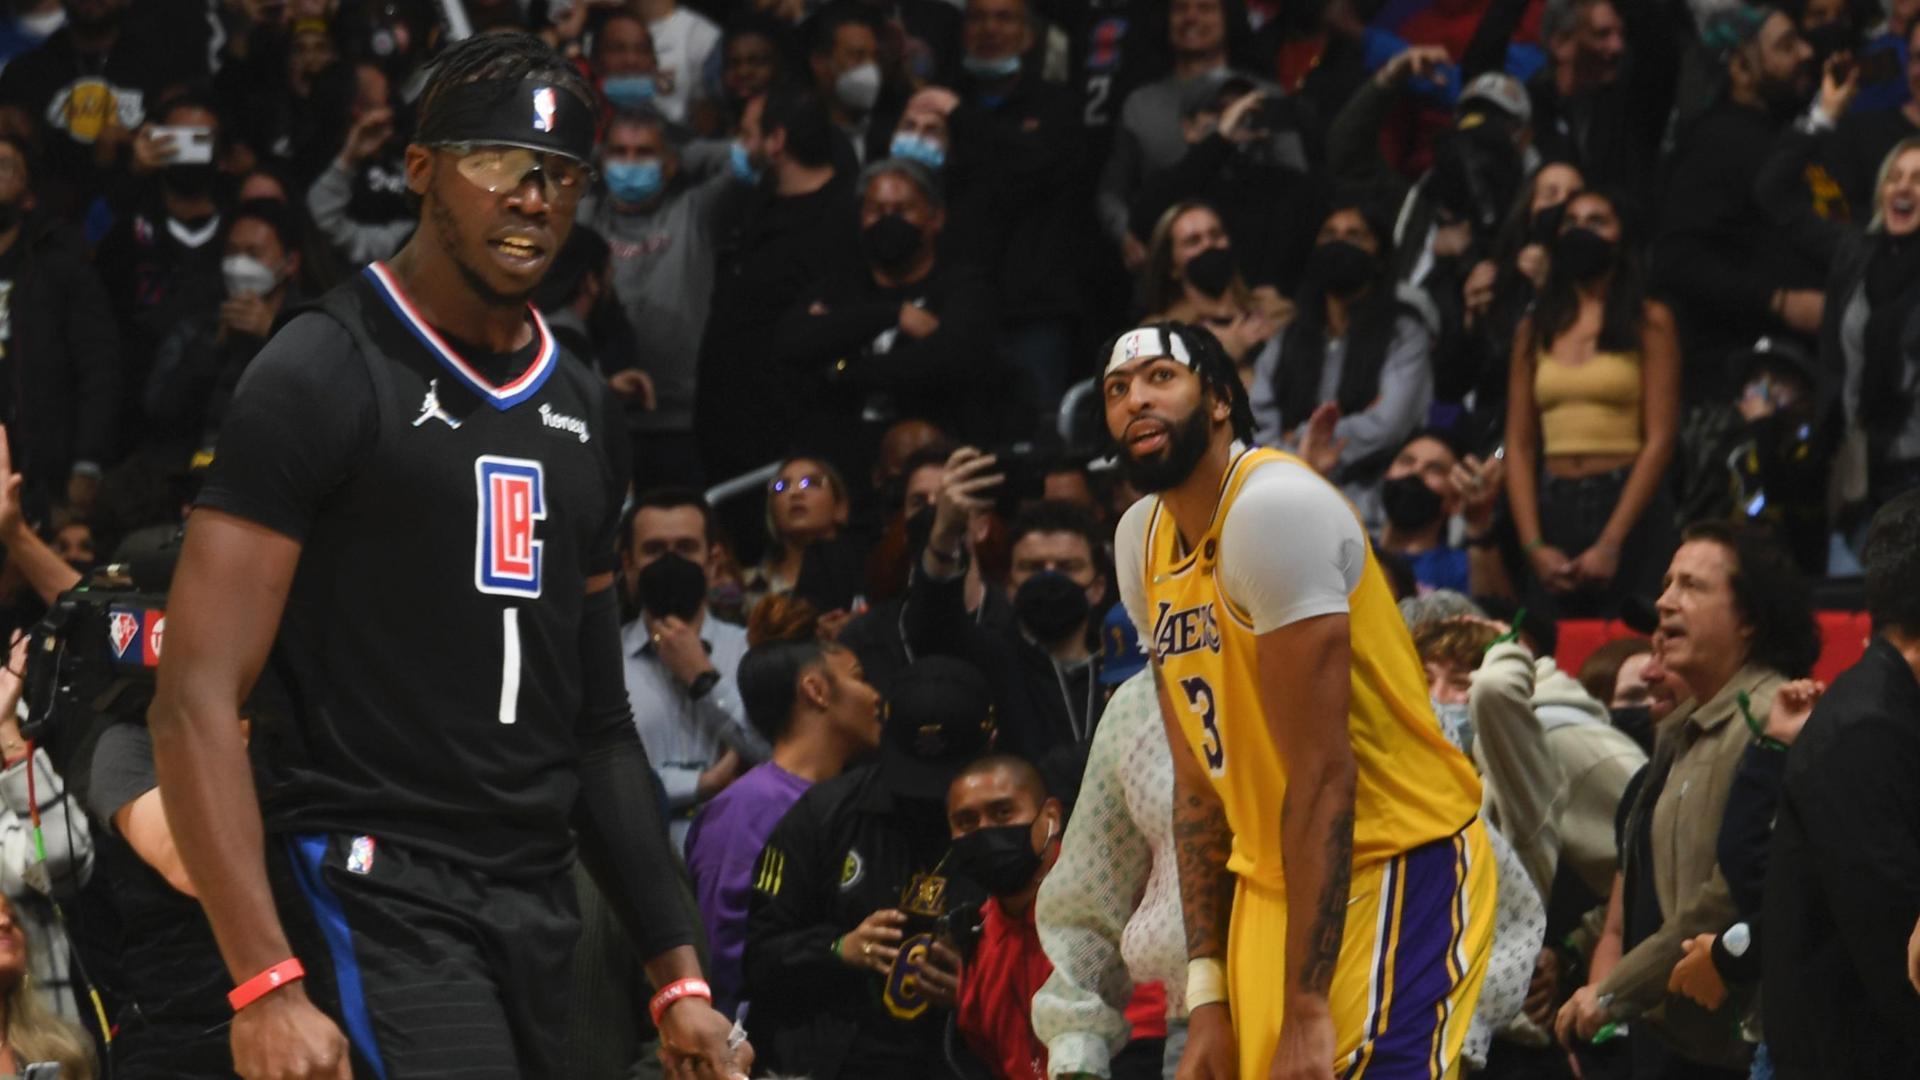 Jackson's layup propells Clippers to 111-110 win over Lakers - ABC7 Los Angeles